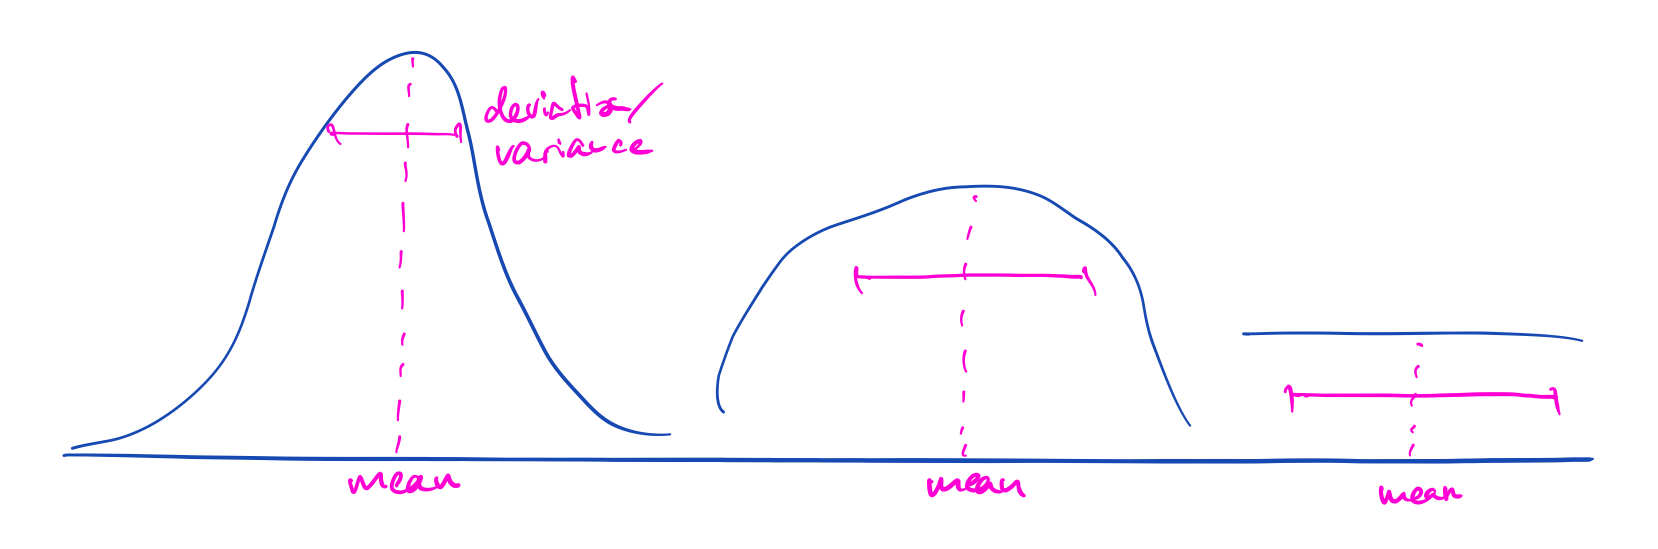 A sketch of 3 distributions, with their means and standard deviations.